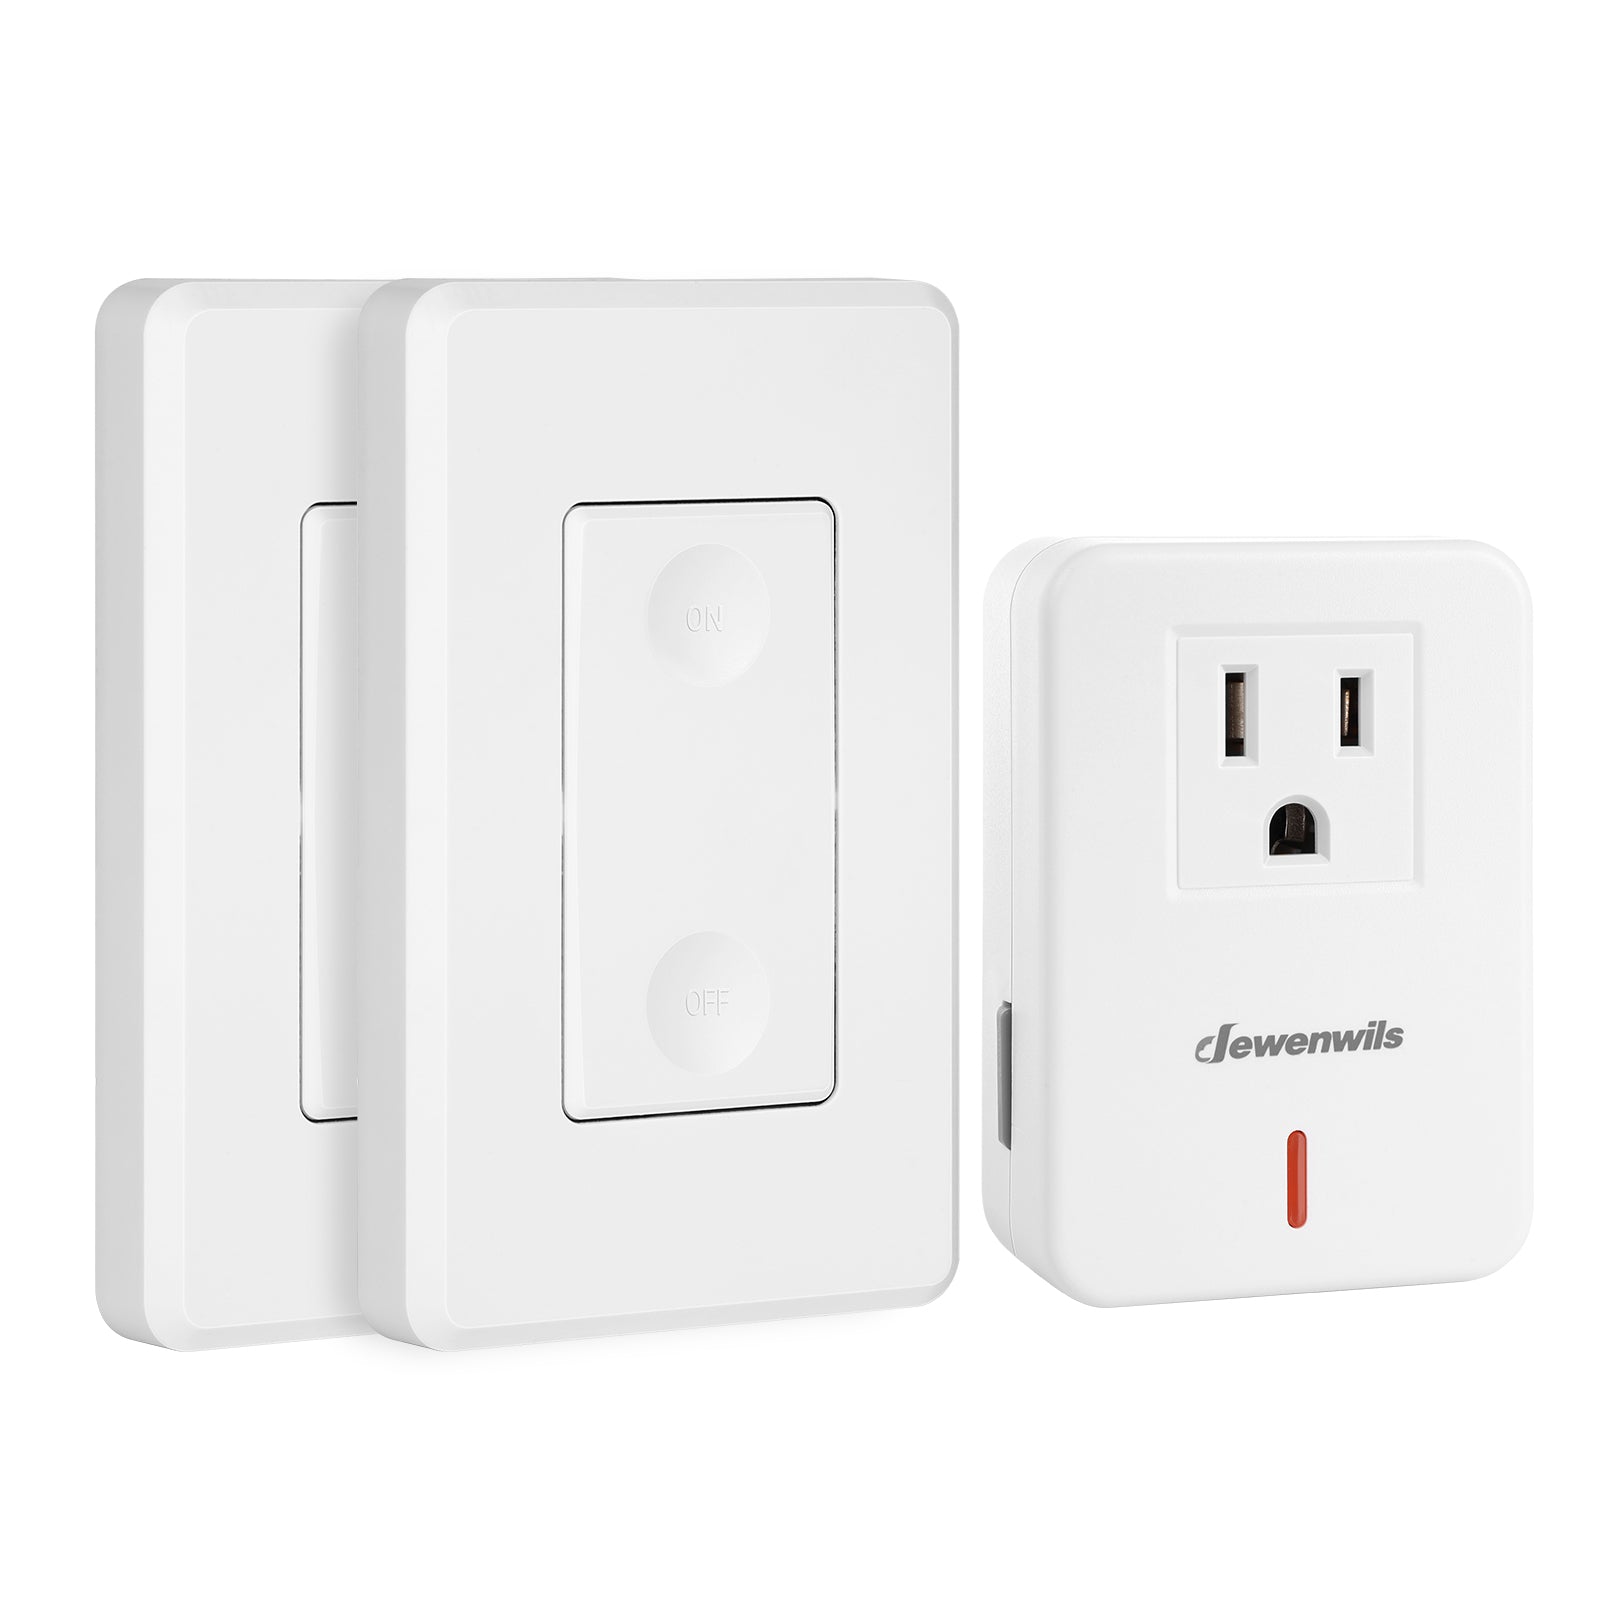 DEWENWILS Indoor Wireless Remote Control Wall Light Switch and Outlet, 100 ft RF Range, for Lights, Fans, Lamps, Christmas Lights